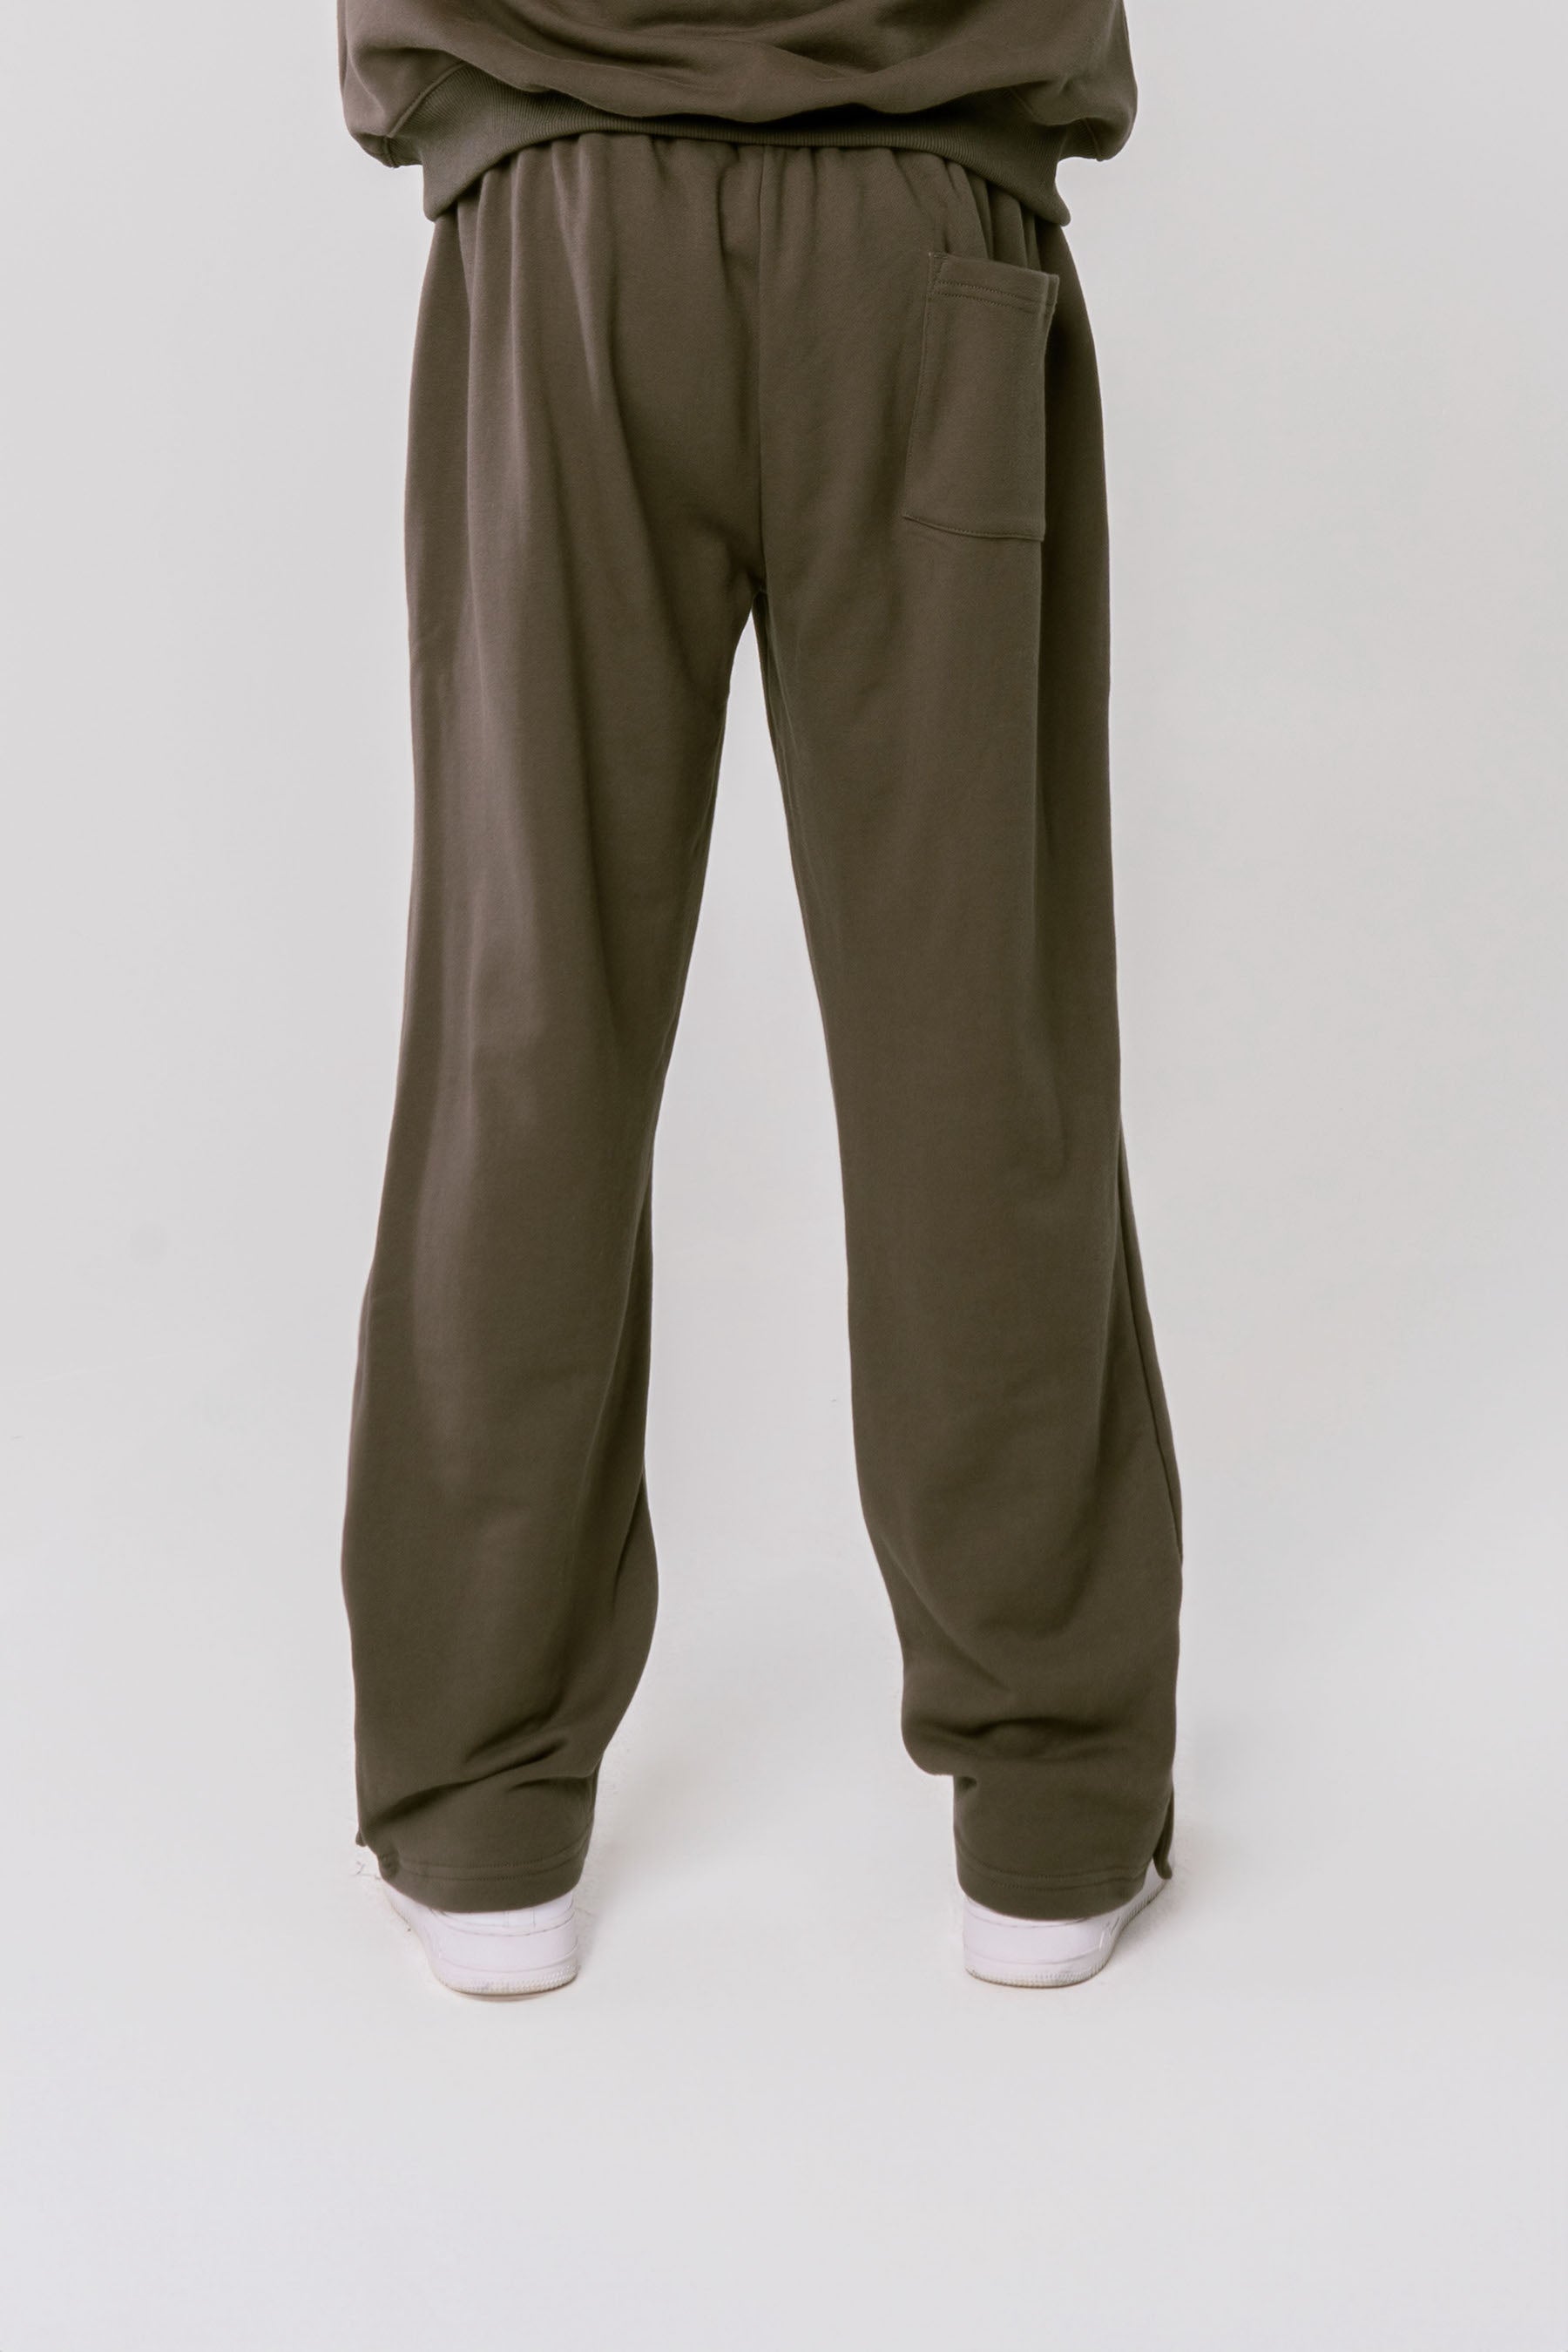 EST. Relaxed Sweats - Charcoal